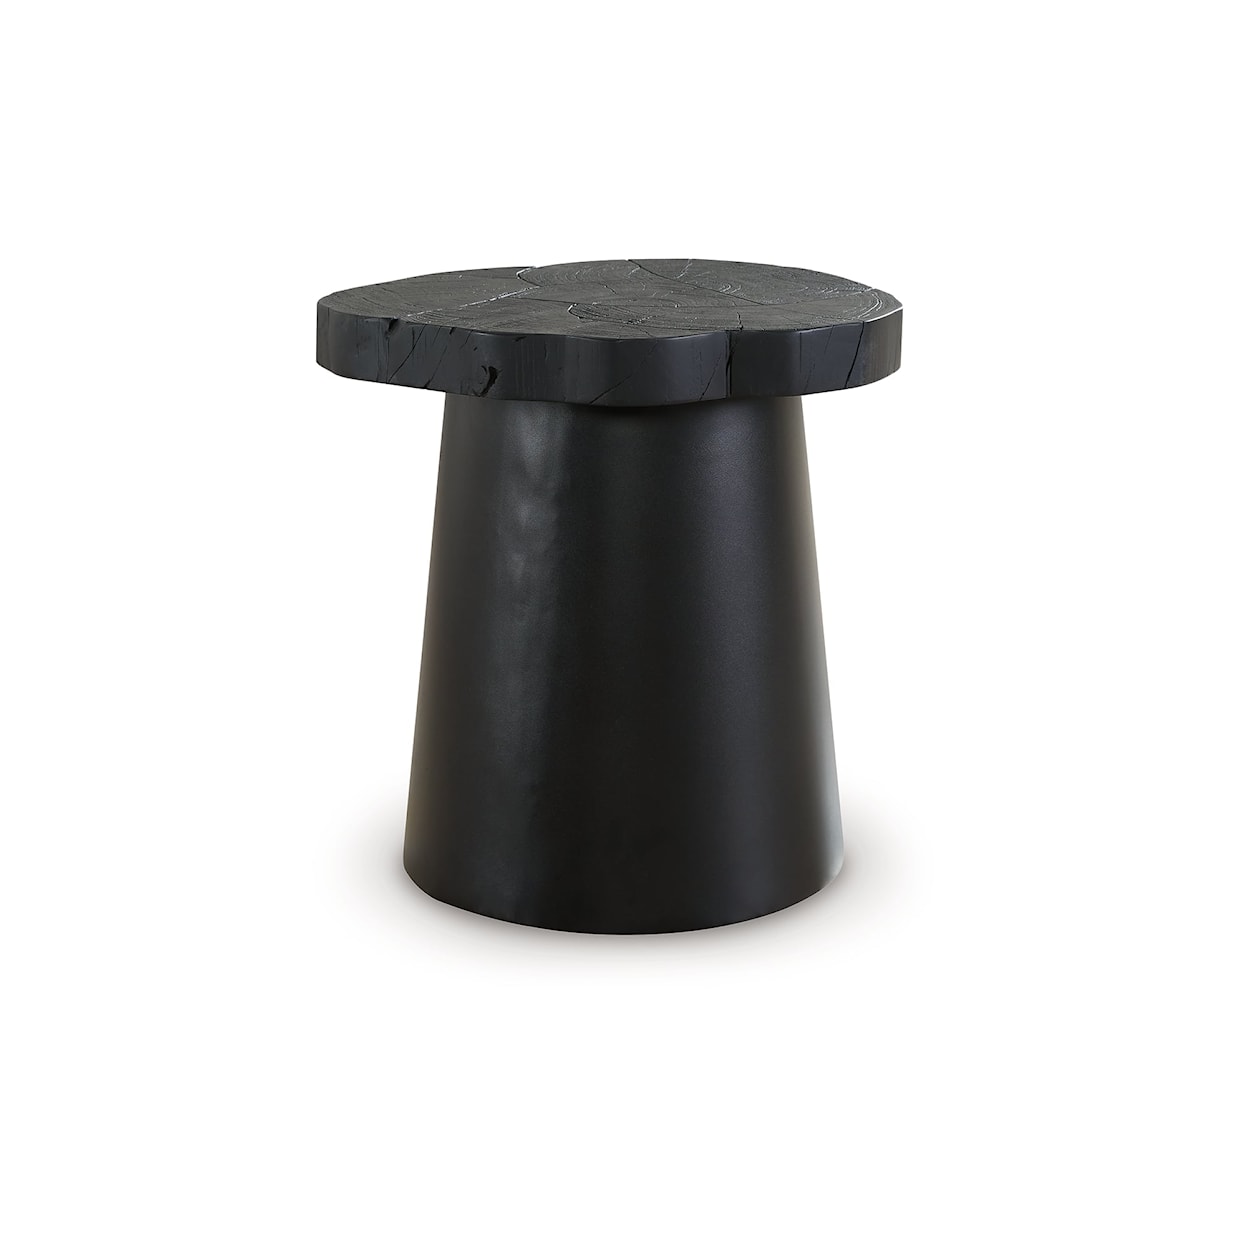 Benchcraft Wimbell Round End Table